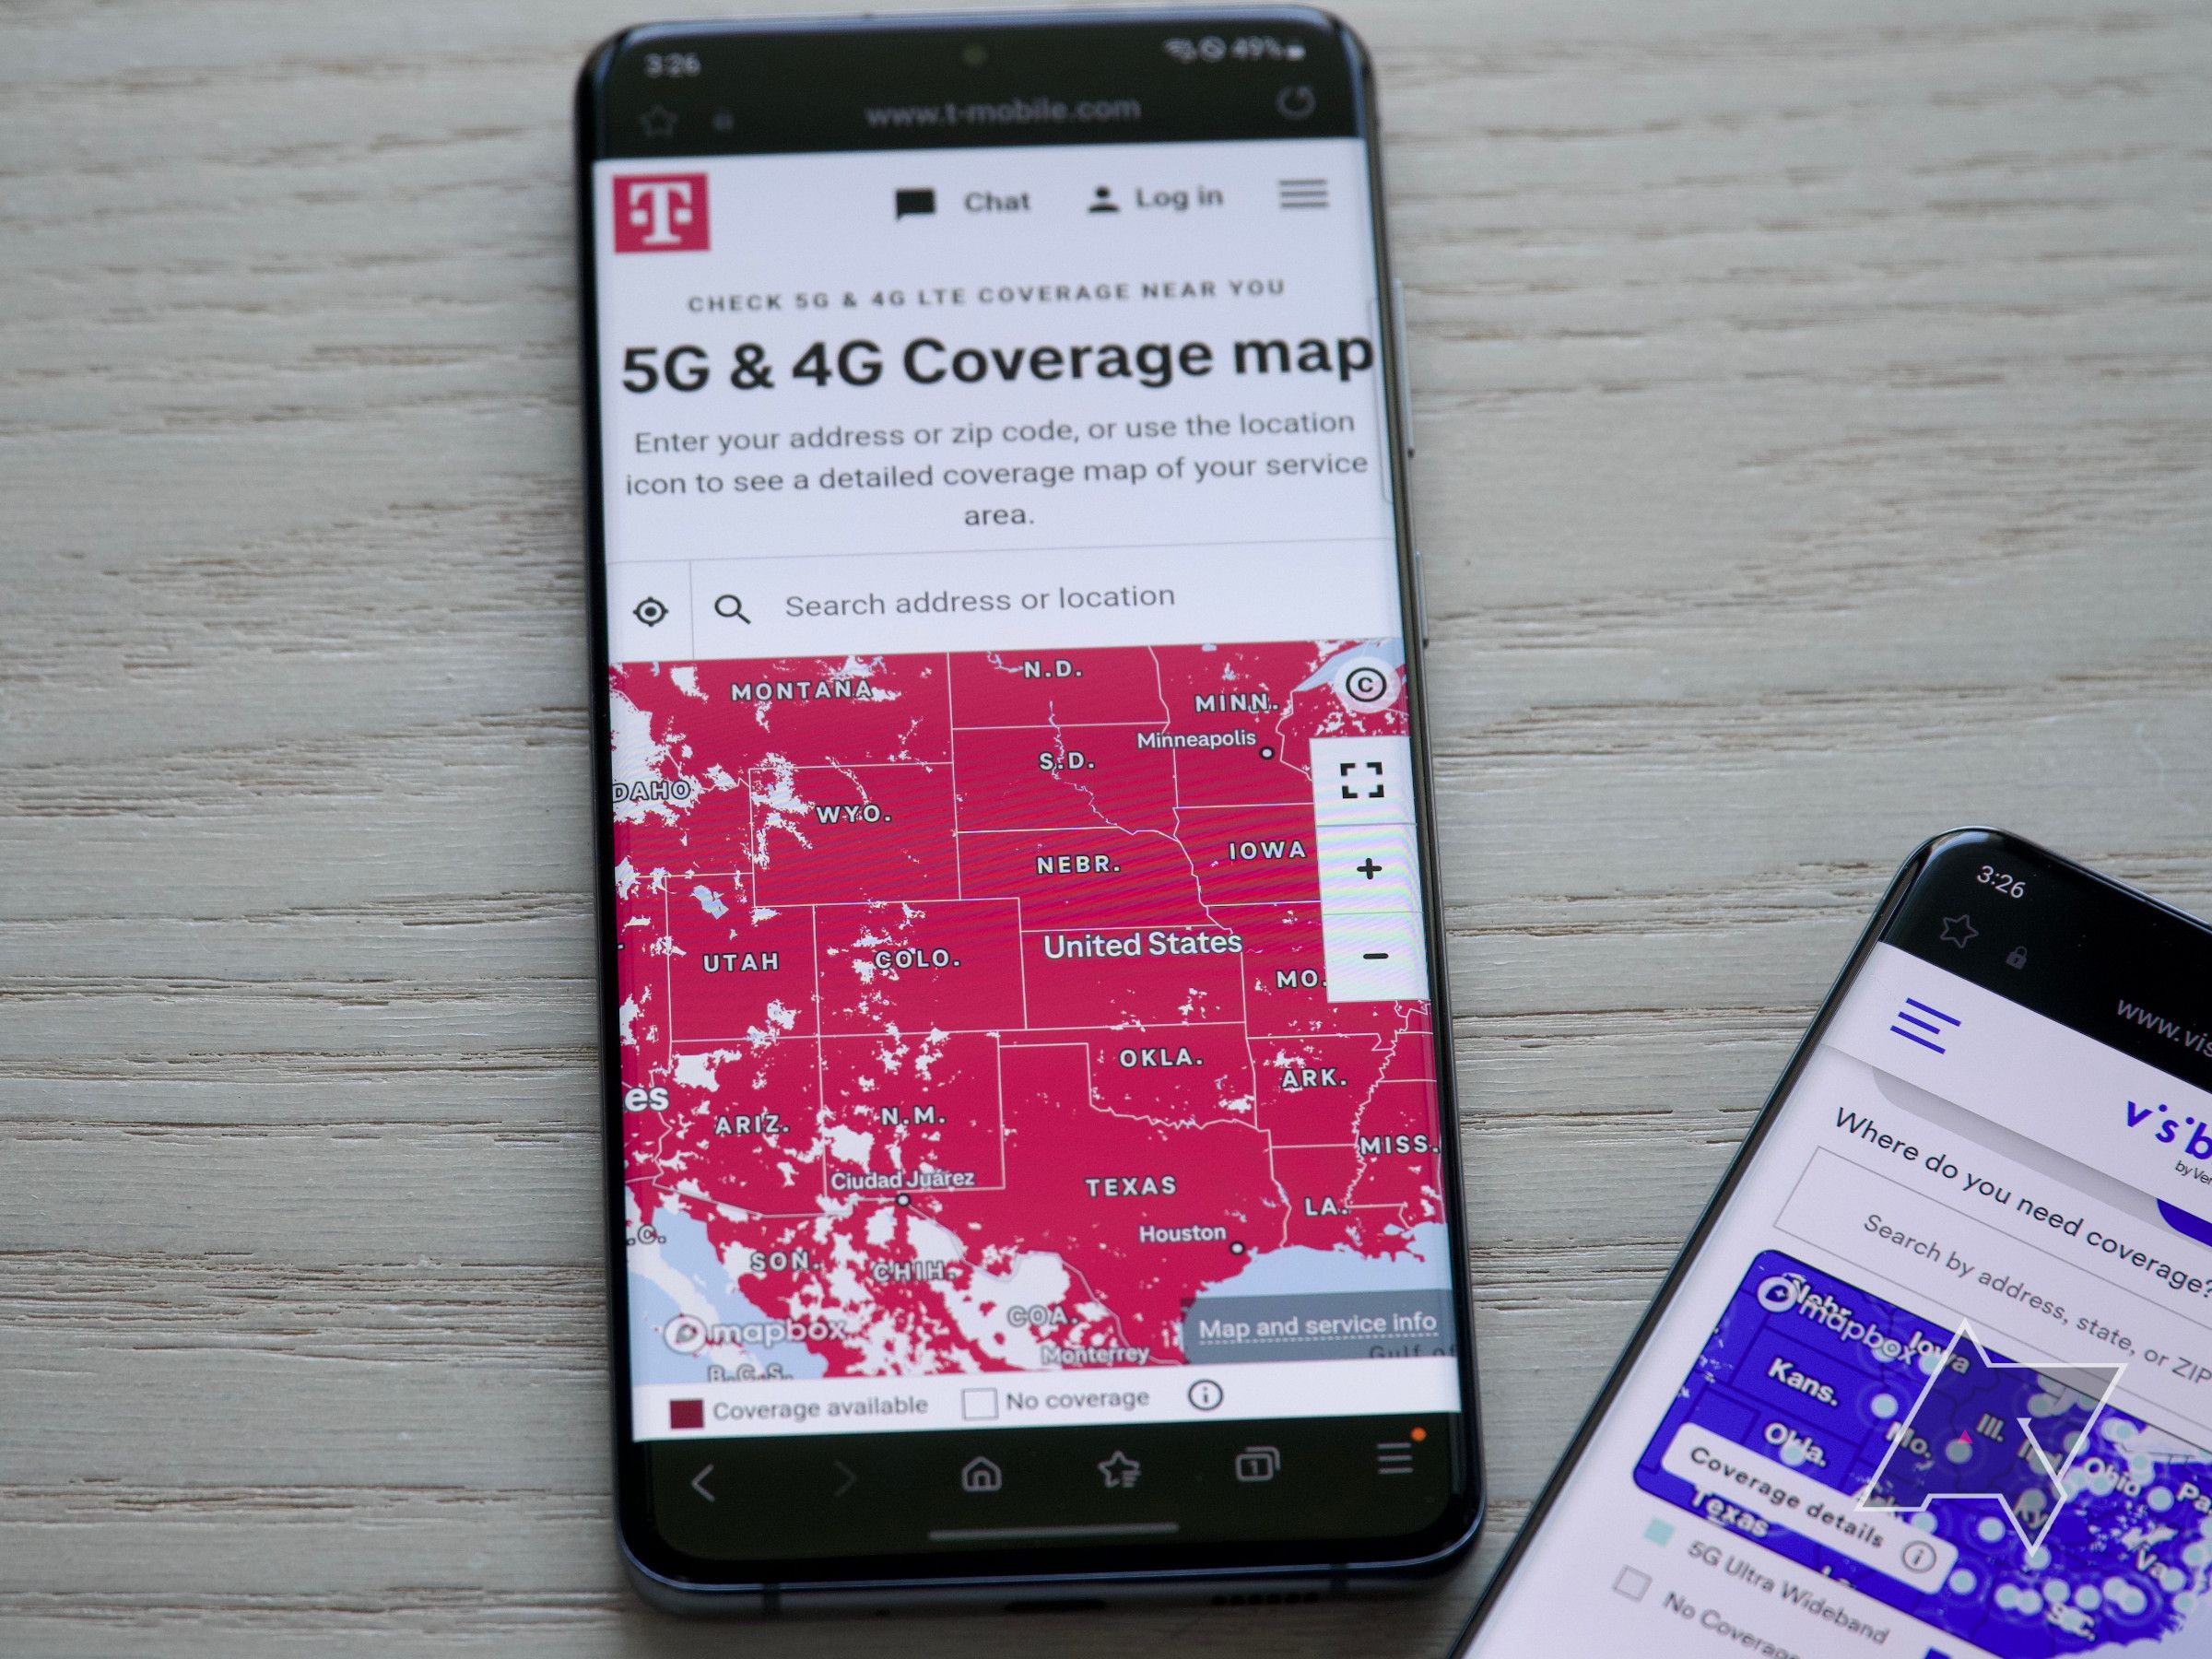 The T-Mobile coverage map shows nationwide 5G coverage